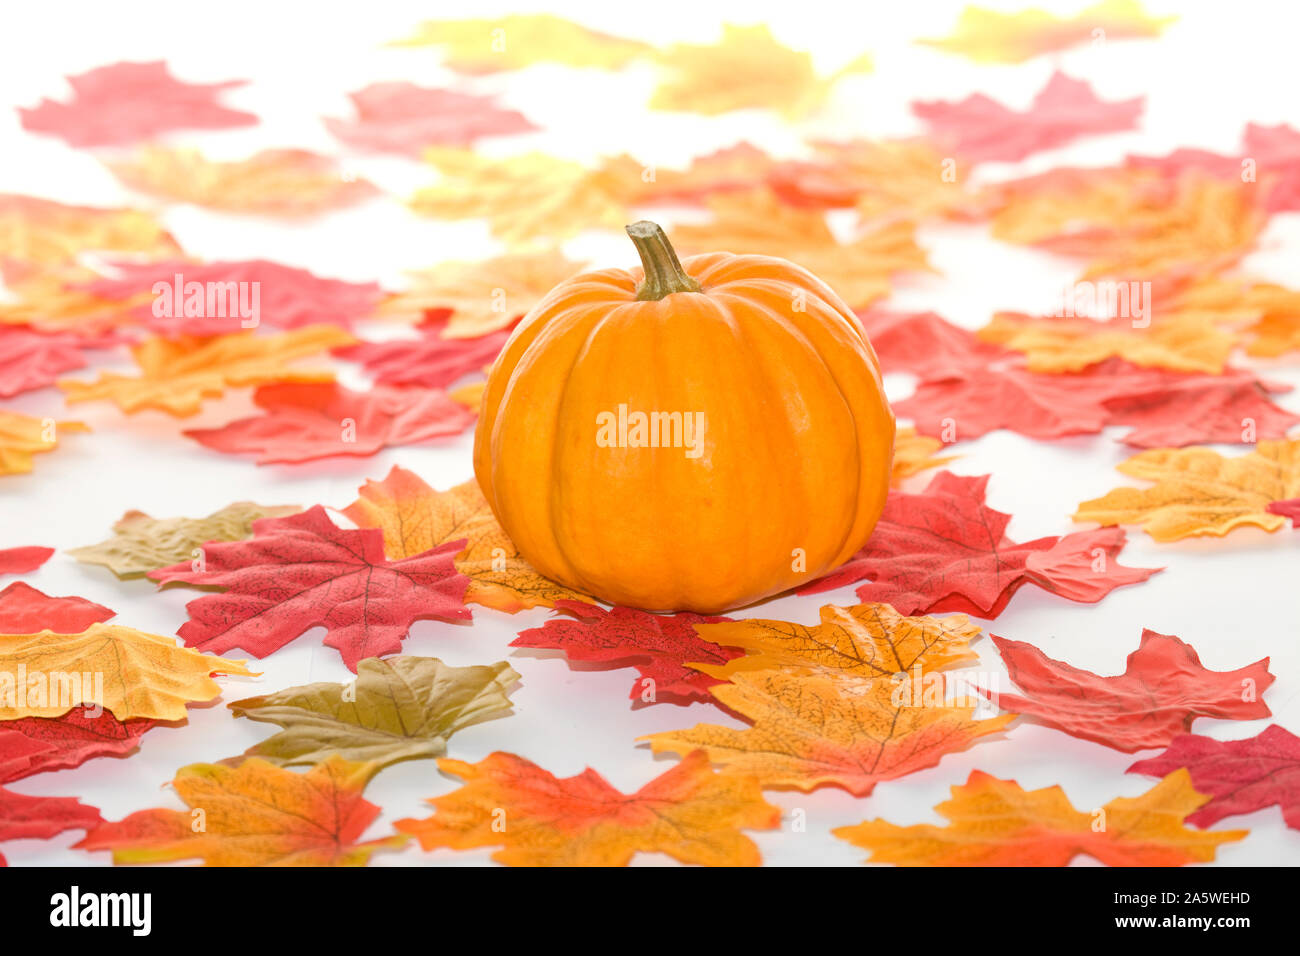 Single whole pumpkin with bright coloured leaves Stock Photo